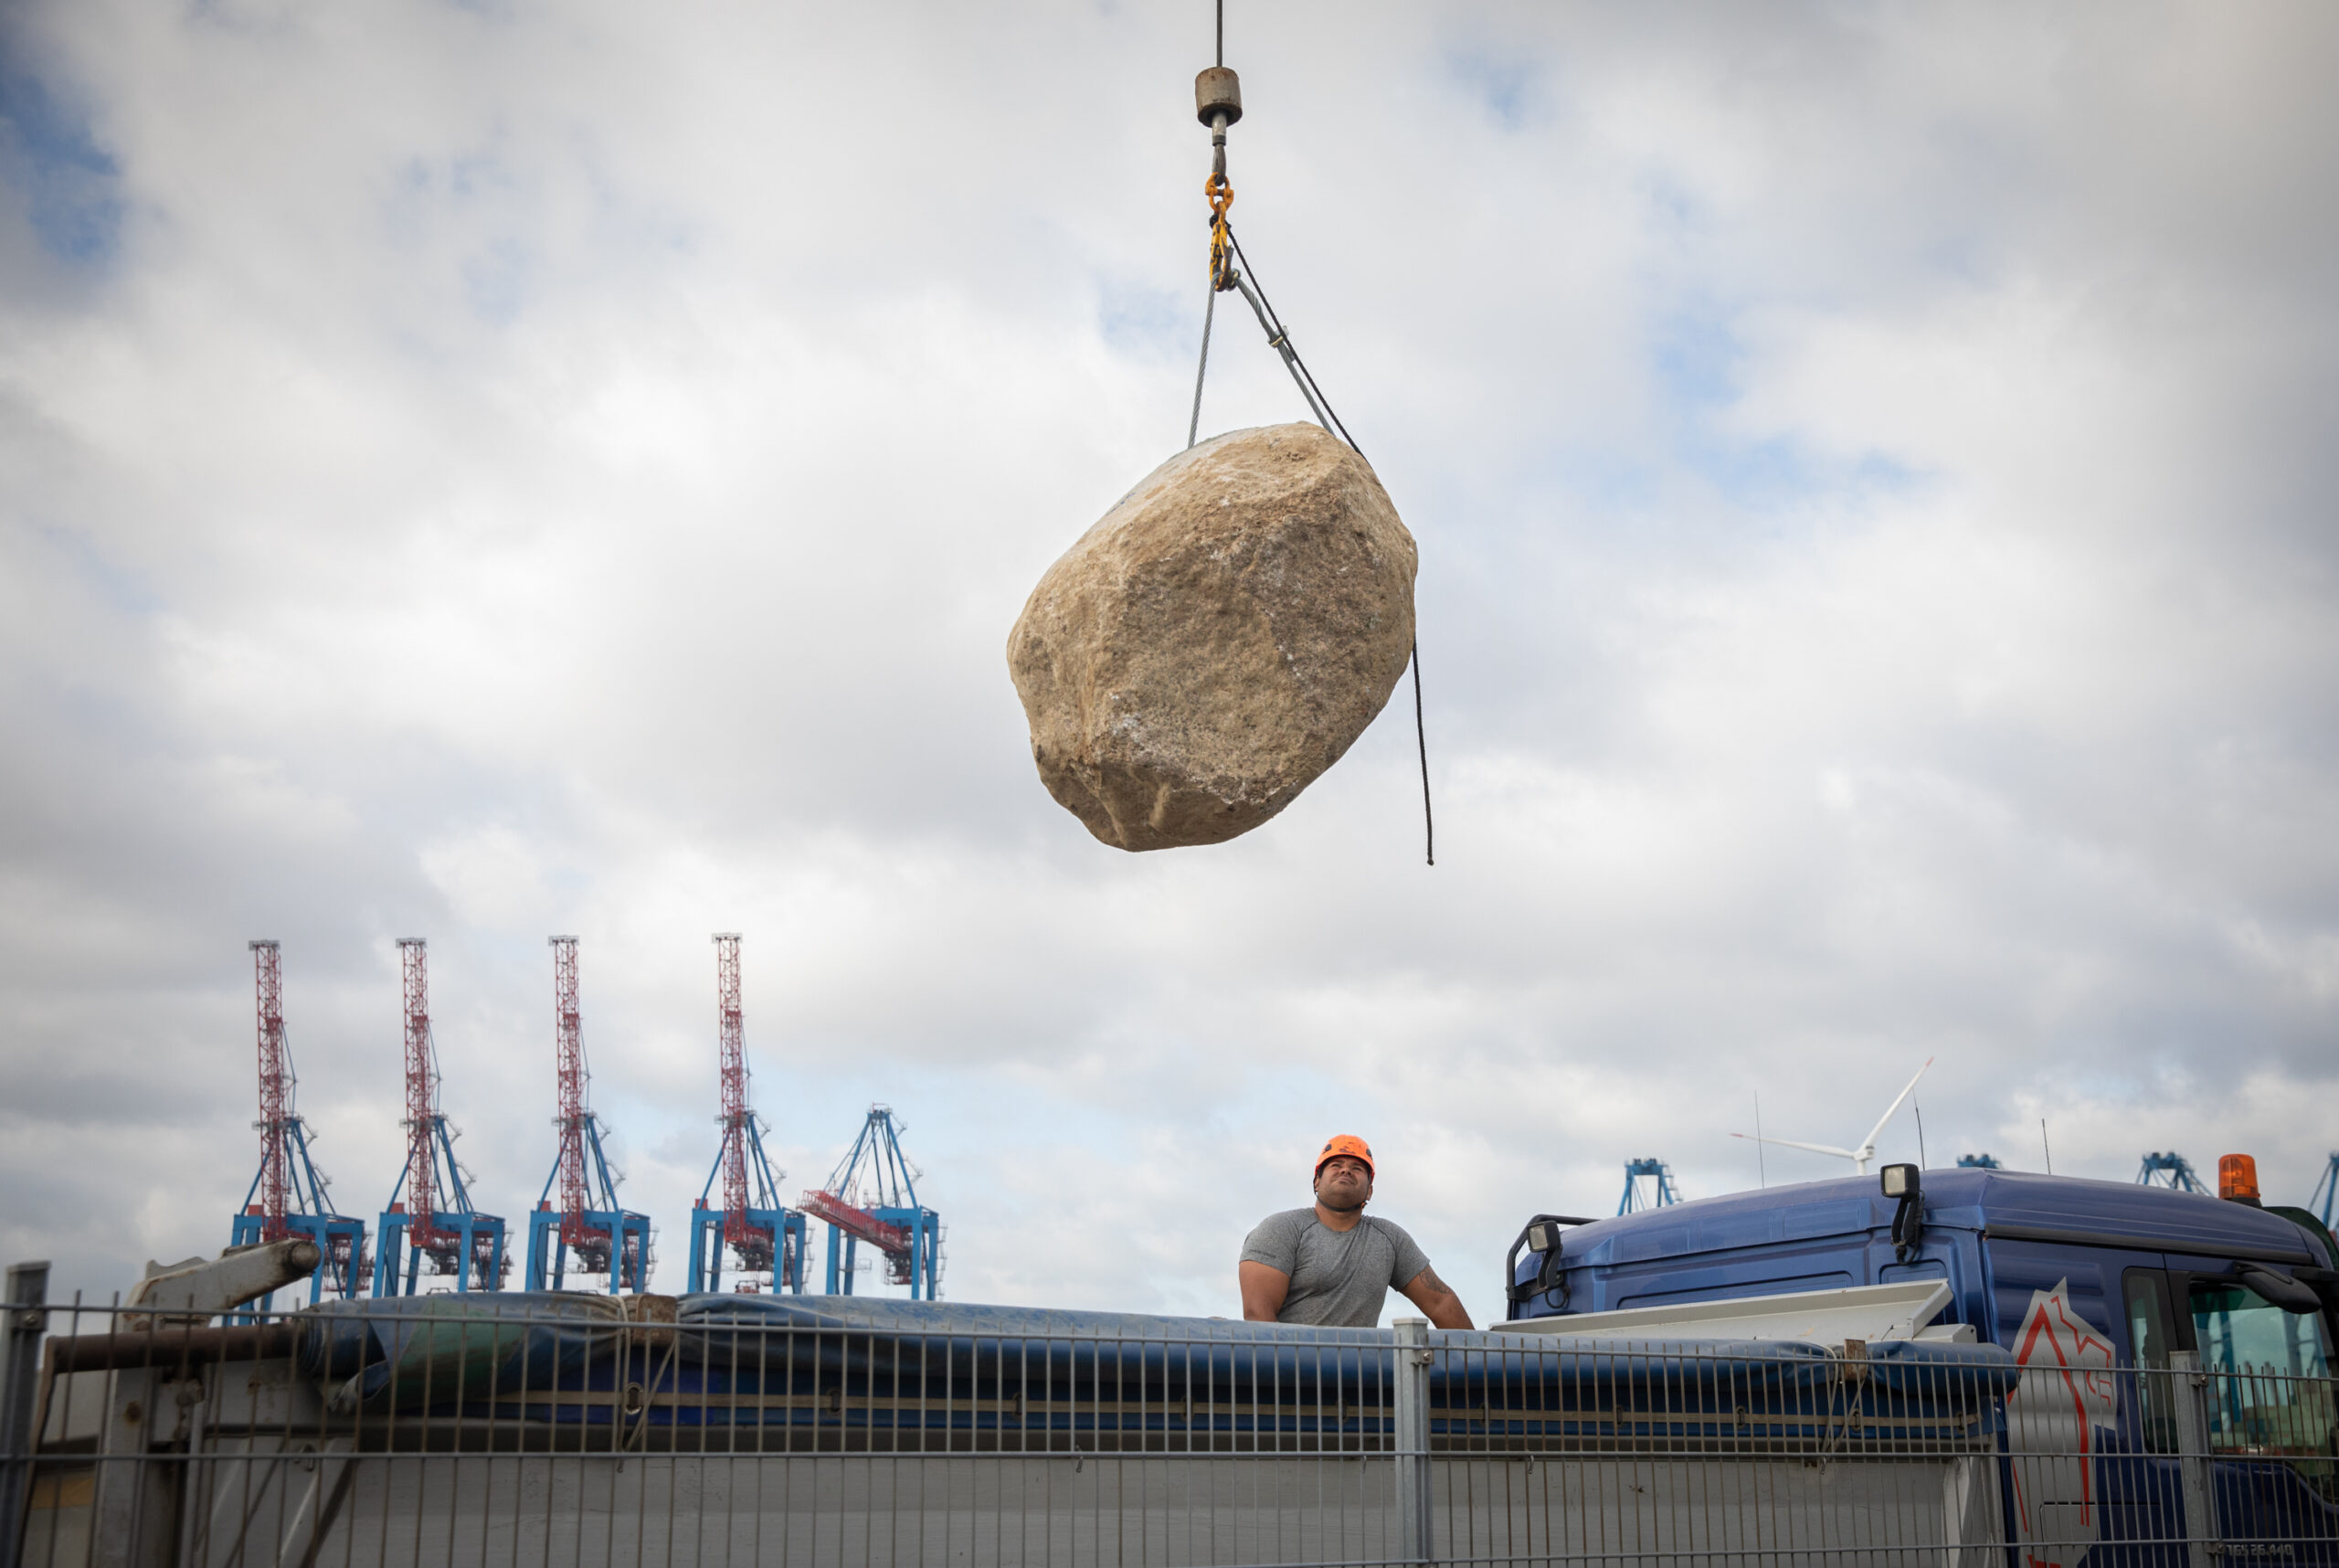 A Greenpeace crew member watches a boulder being lifted onto the ship by crane.